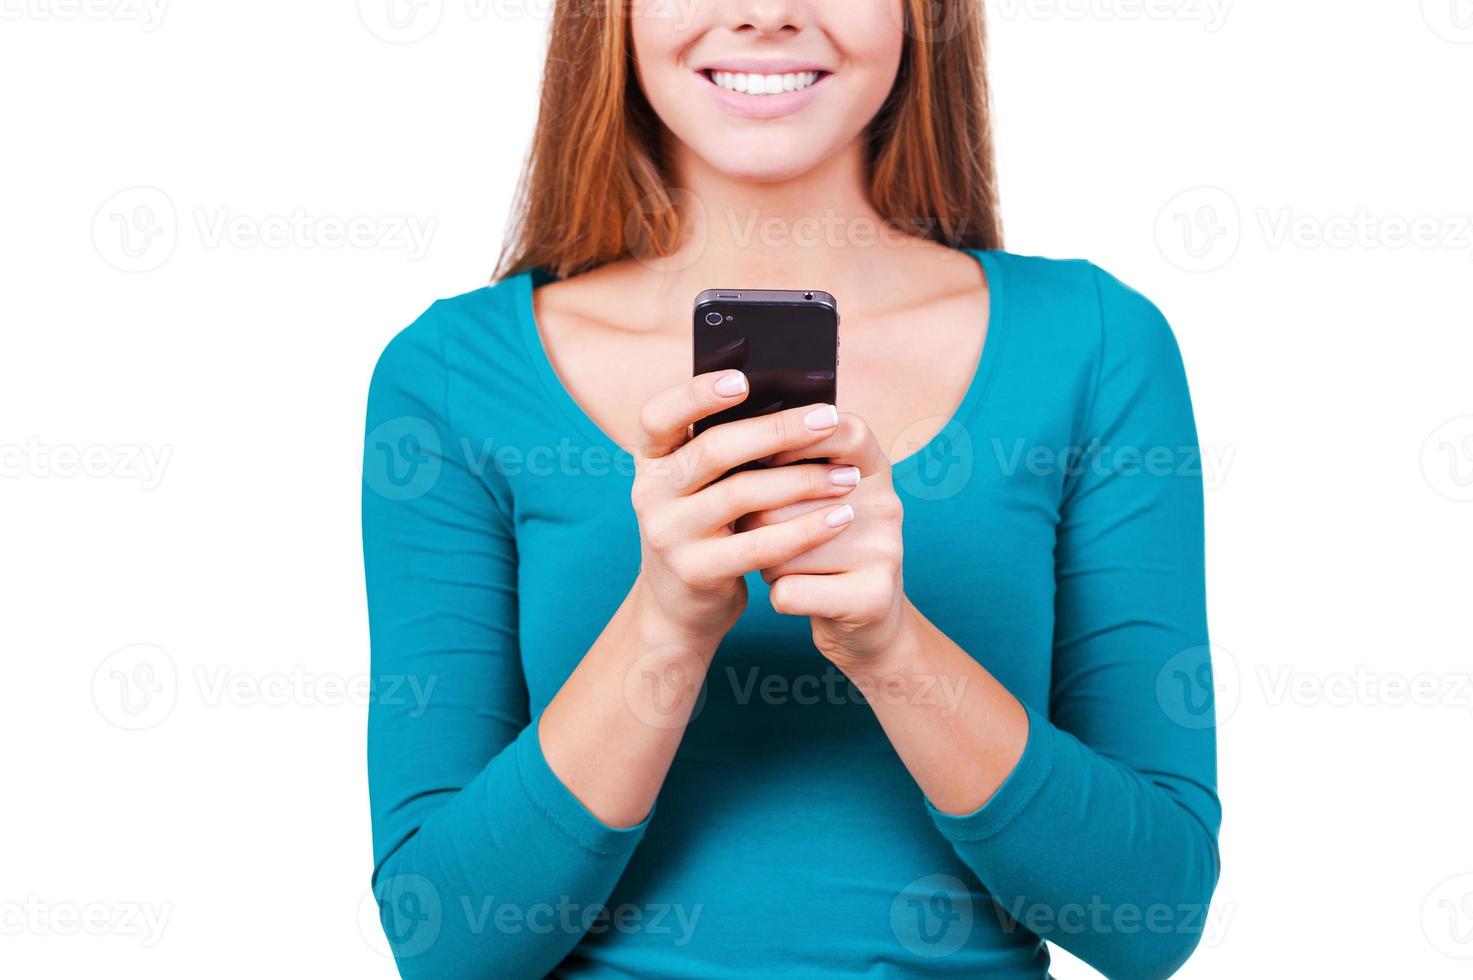 Typing a message for you. Close-up of young women talking on the mobile phone and smiling while standing against white background photo